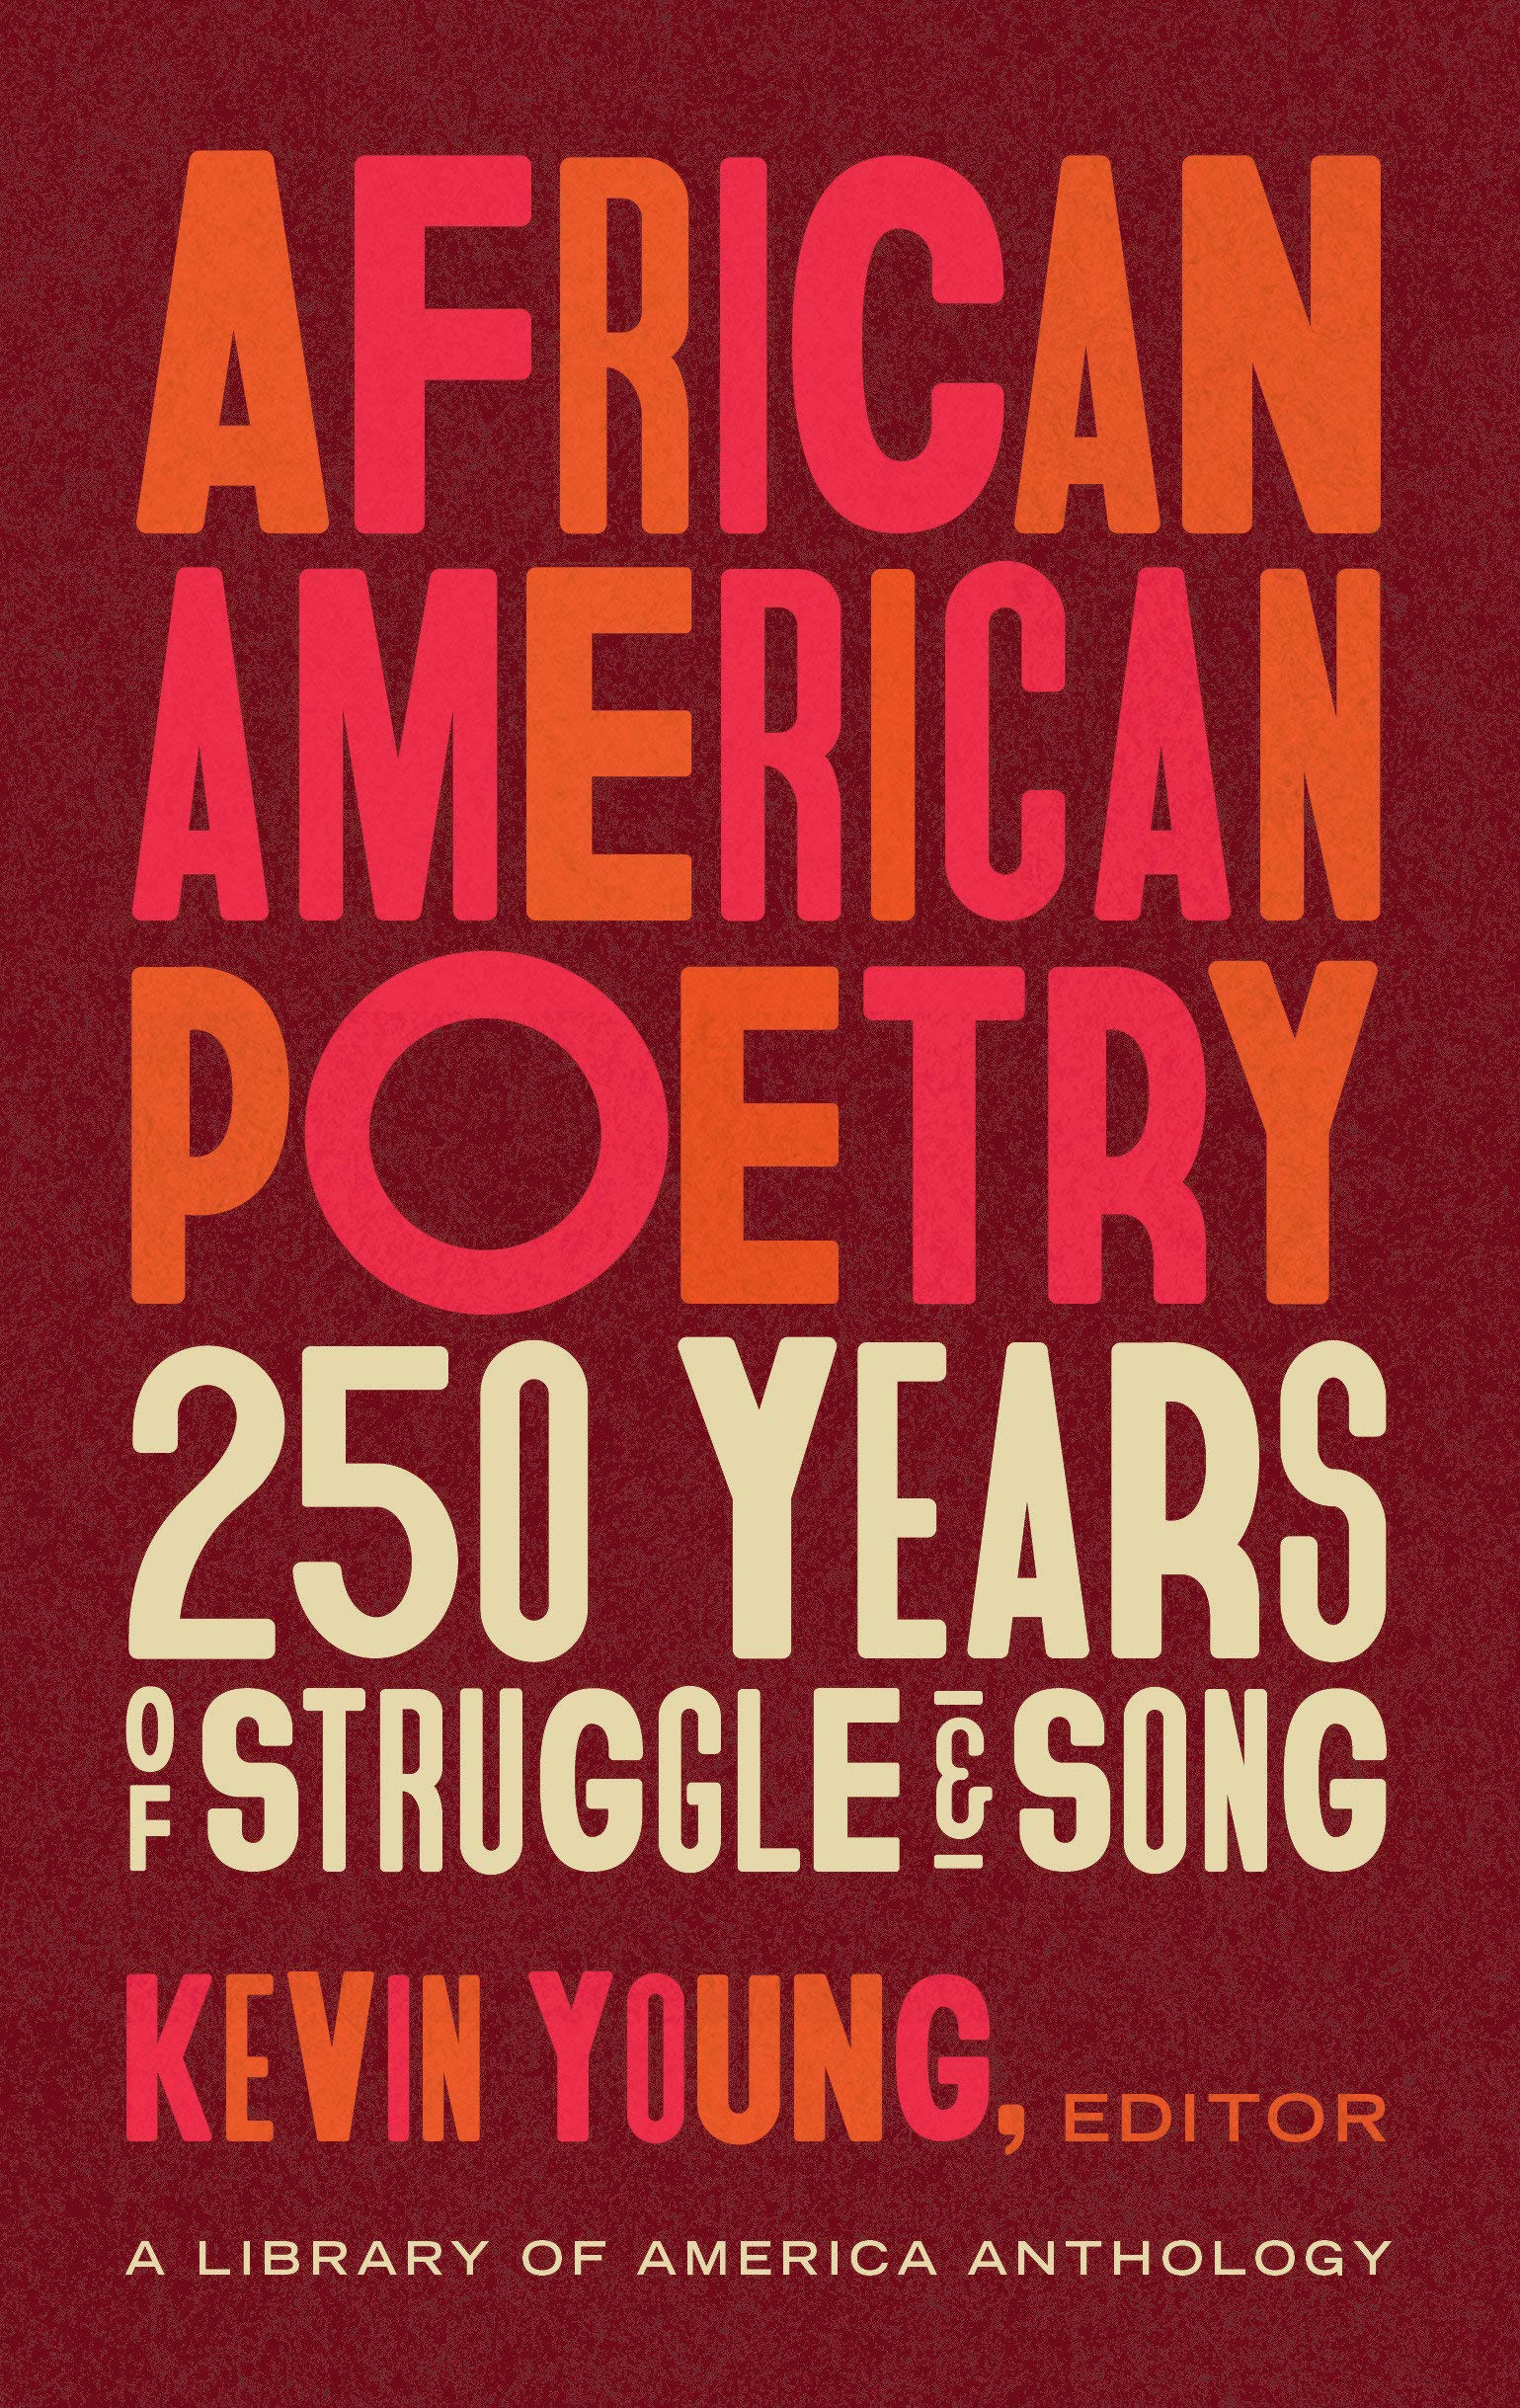 Image for "African American Poetry"